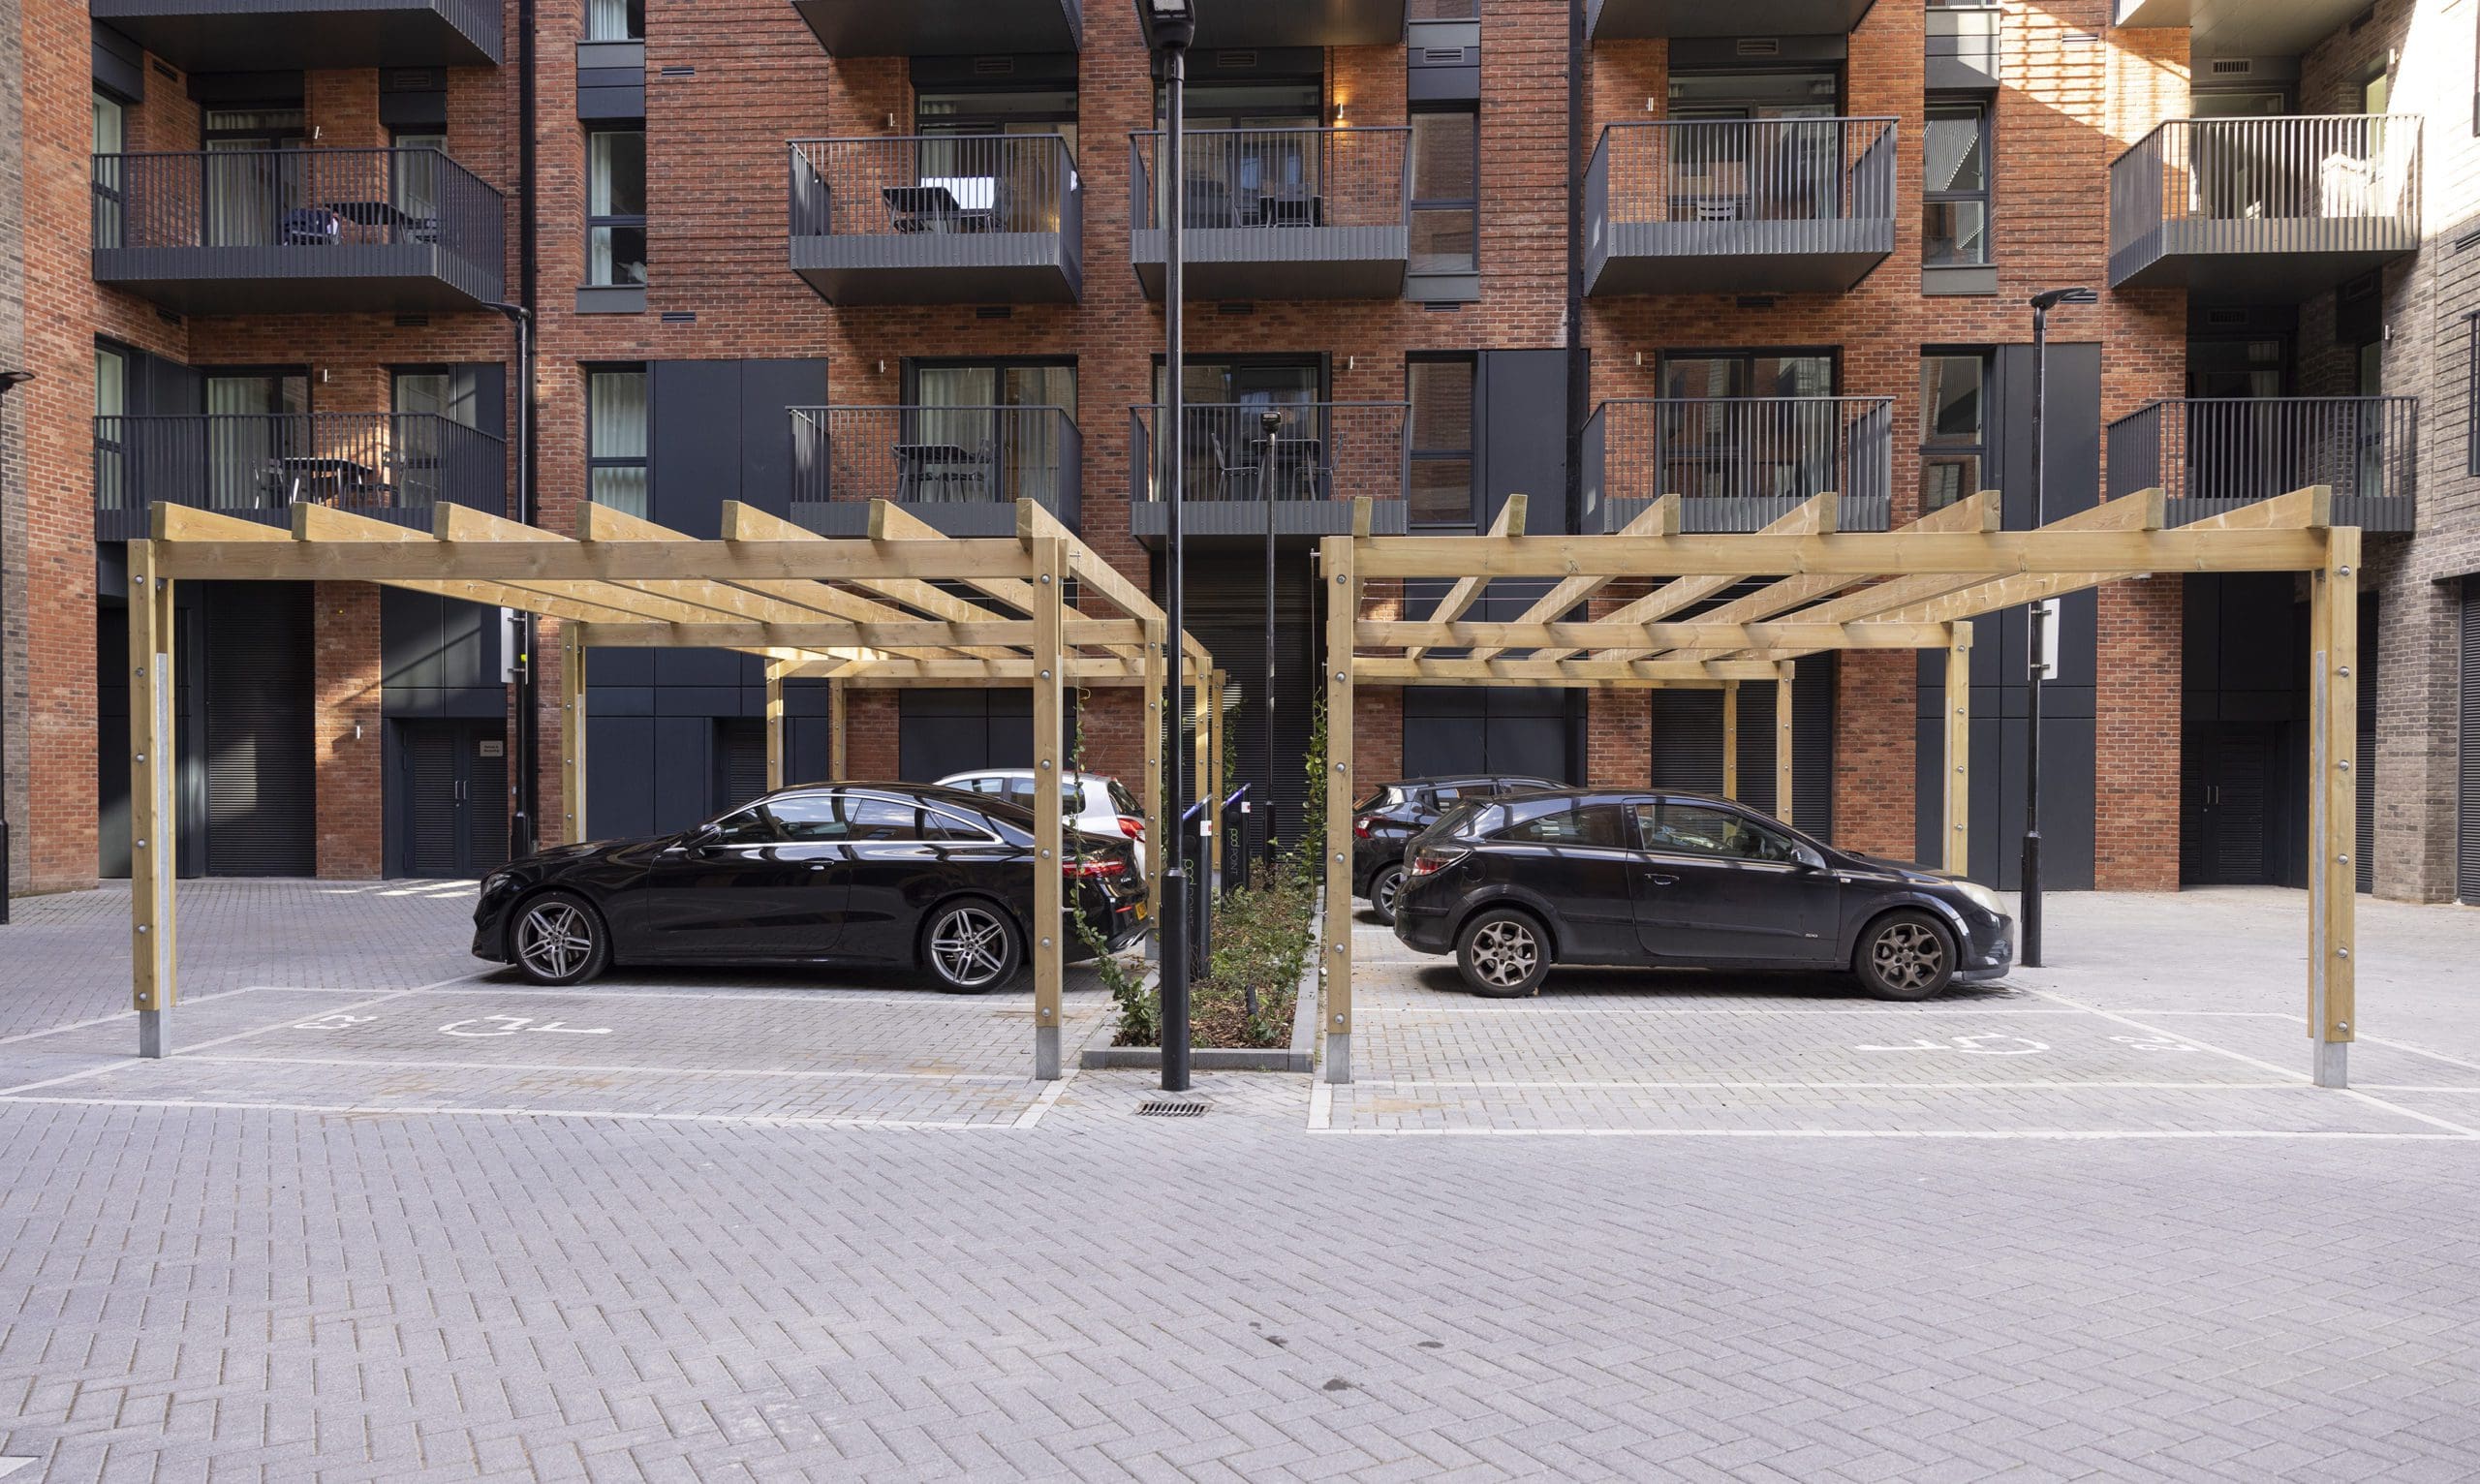 collection-of-wooden-pergolas-covering-car-parking-spaces-outside